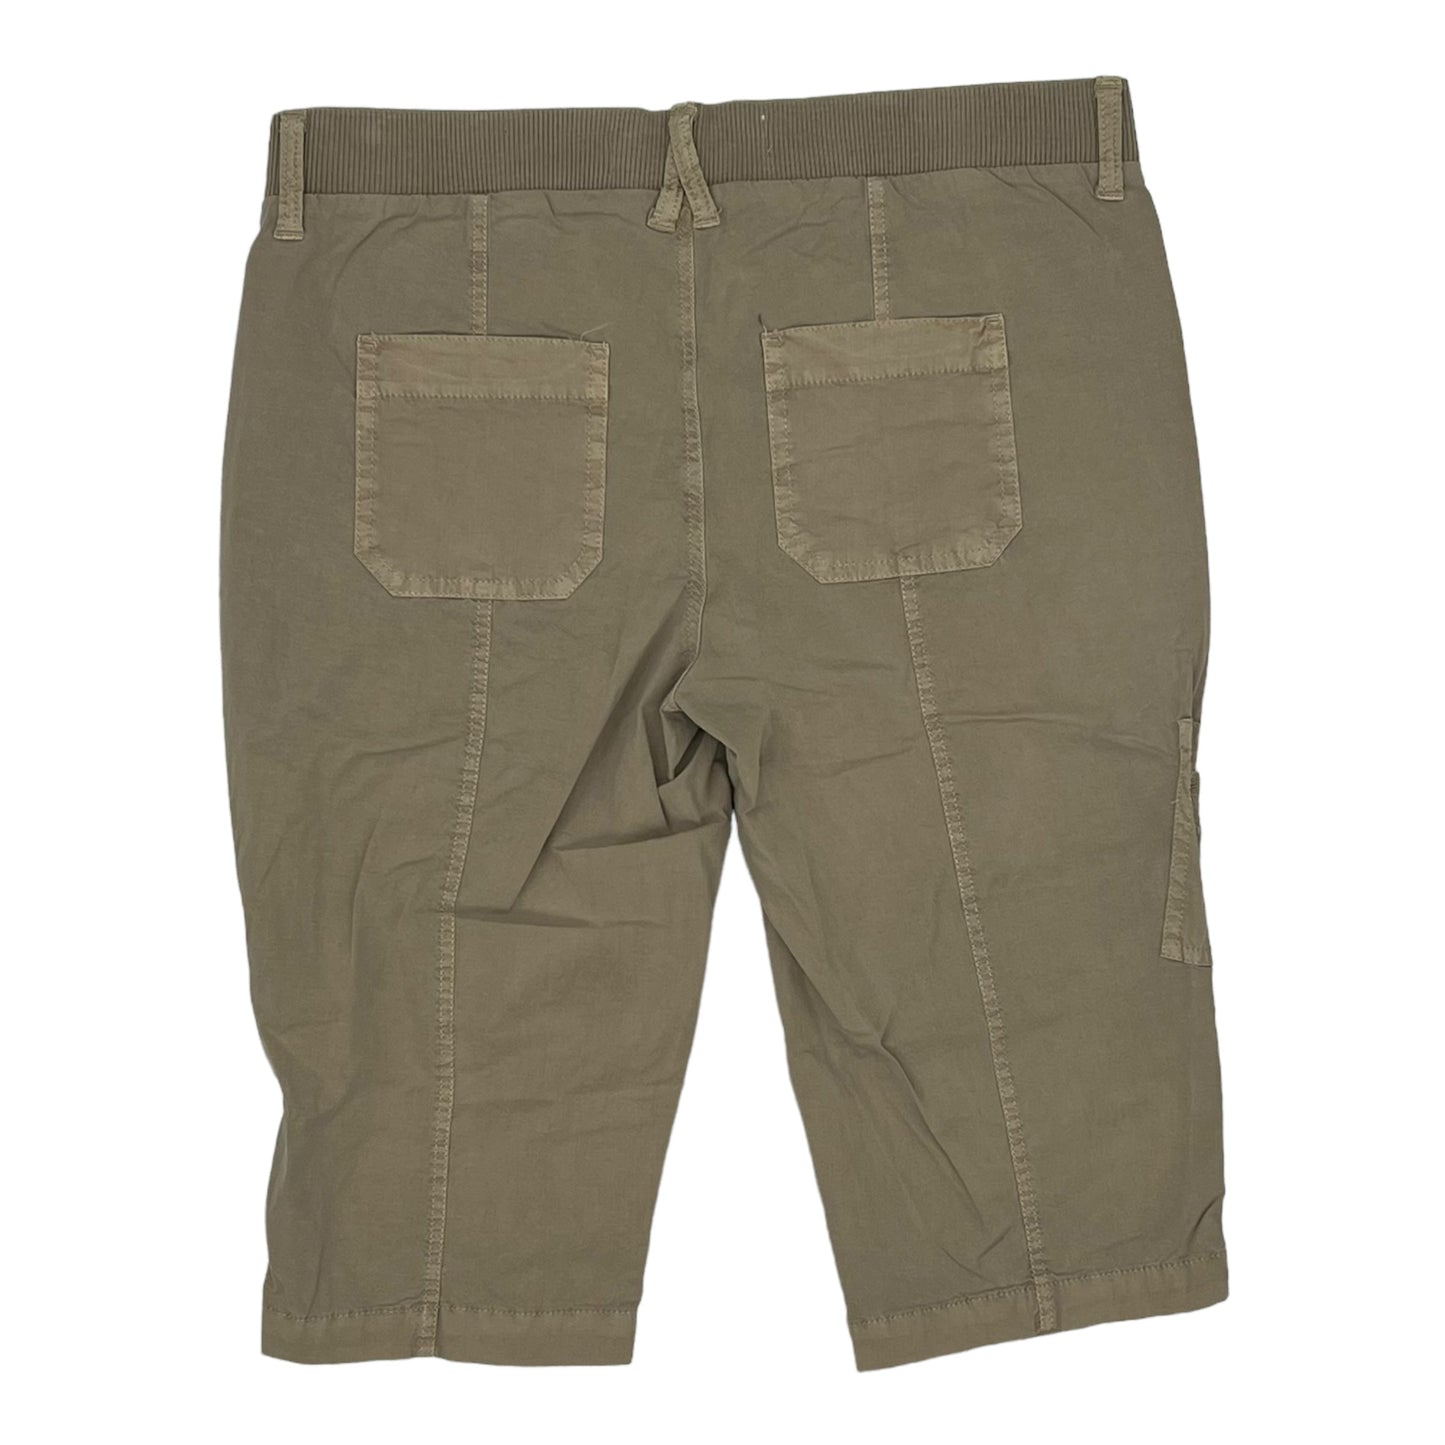 Shorts By Sonoma  Size: 6